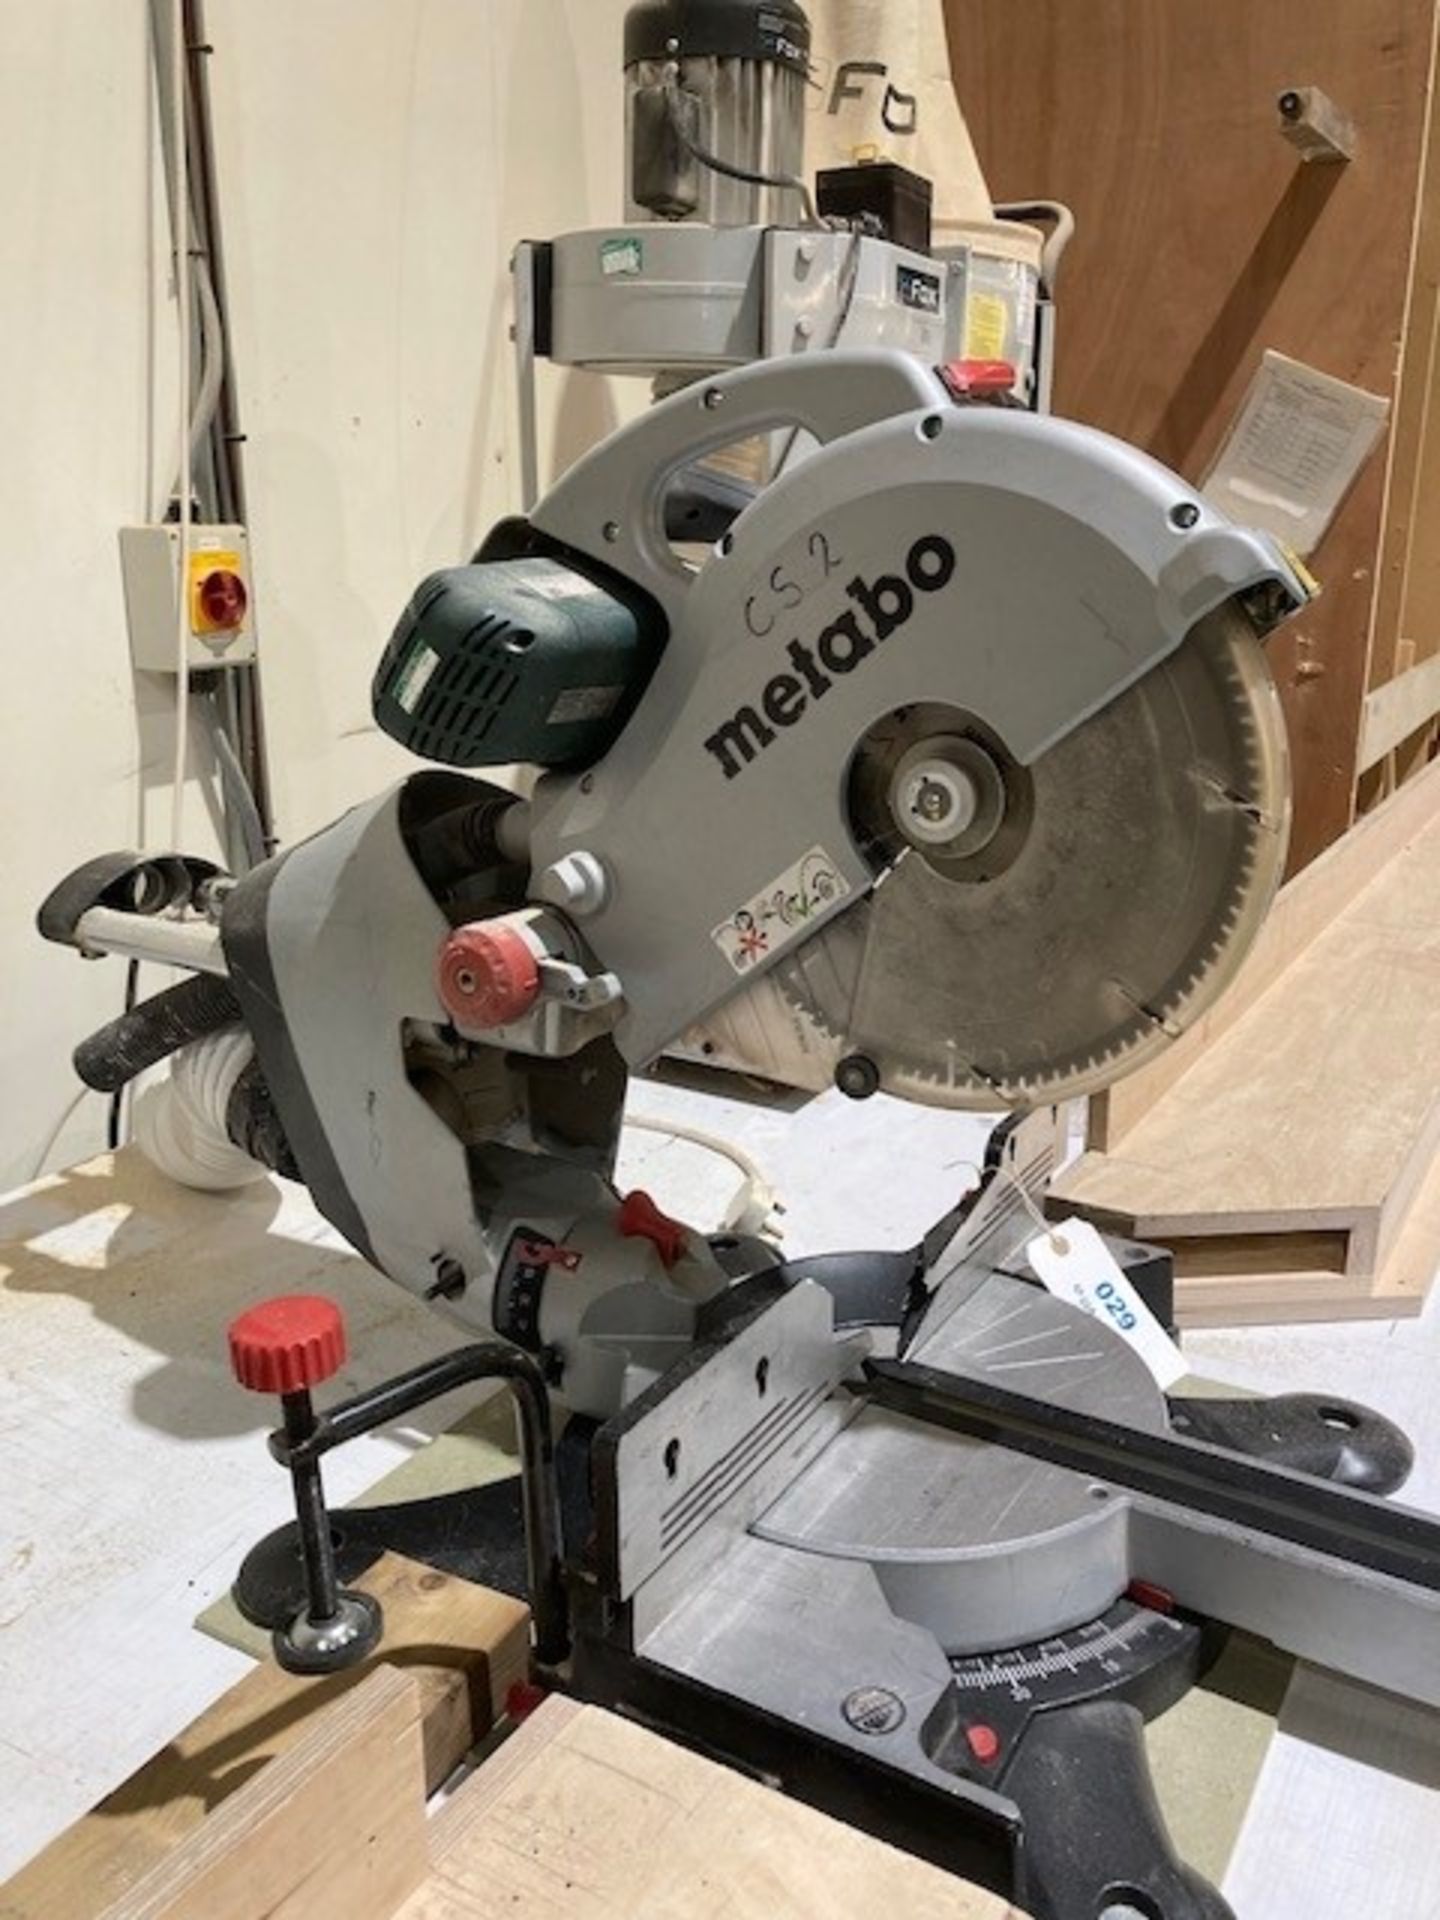 Metabo KGS 315 Plus Mitre Saw with Fox F50-841 Dust Extractor & Workbench - Image 3 of 6